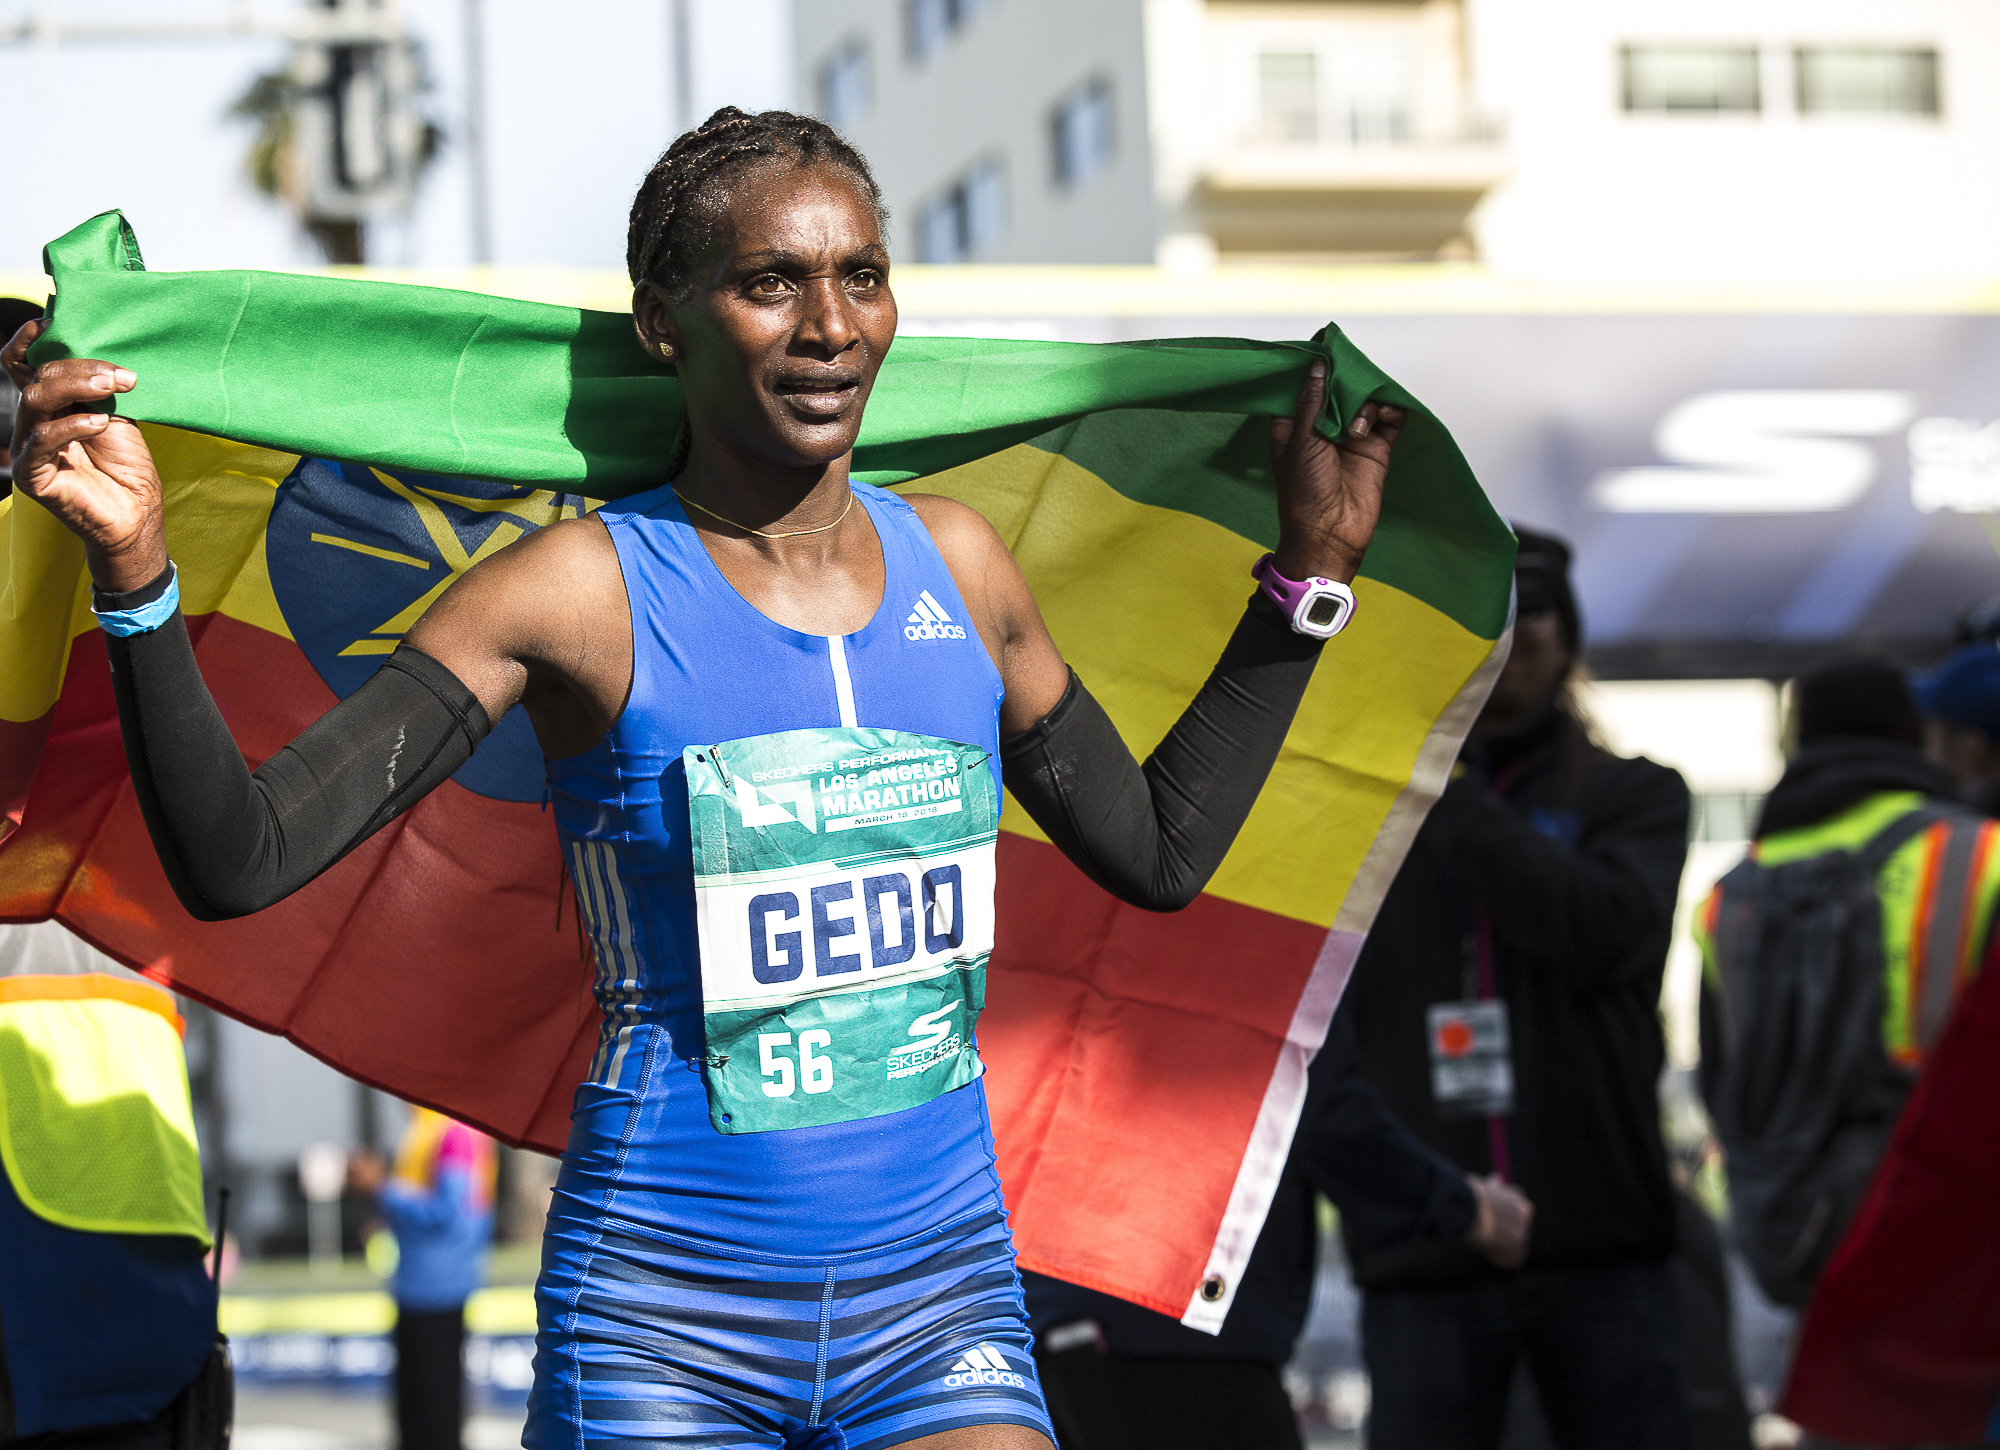  Sule Gedo, the first women to cross the finish line at 2:33:52, proudly holds the Ethiopian flag during the 33rd annual Los Angeles Marathon event on March 18, 2018 in Santa Monica, California. (Matthew Martin/Corsair Photo) 